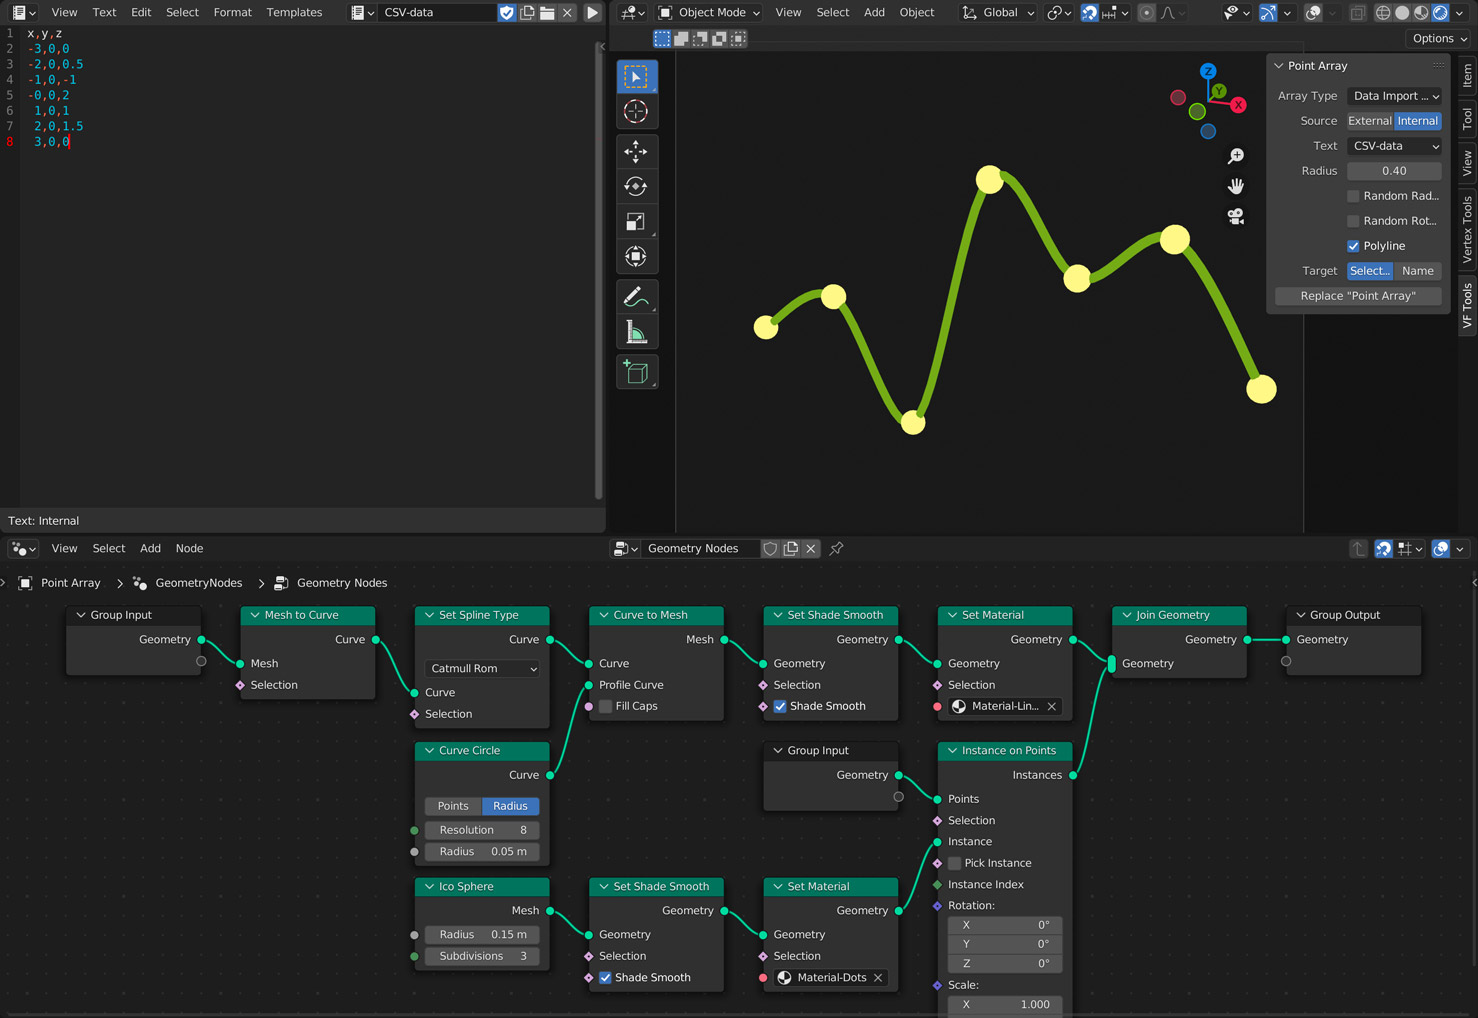 screenshot of the add-on interface in Blender showing the data import options and sample geometry nodes setup